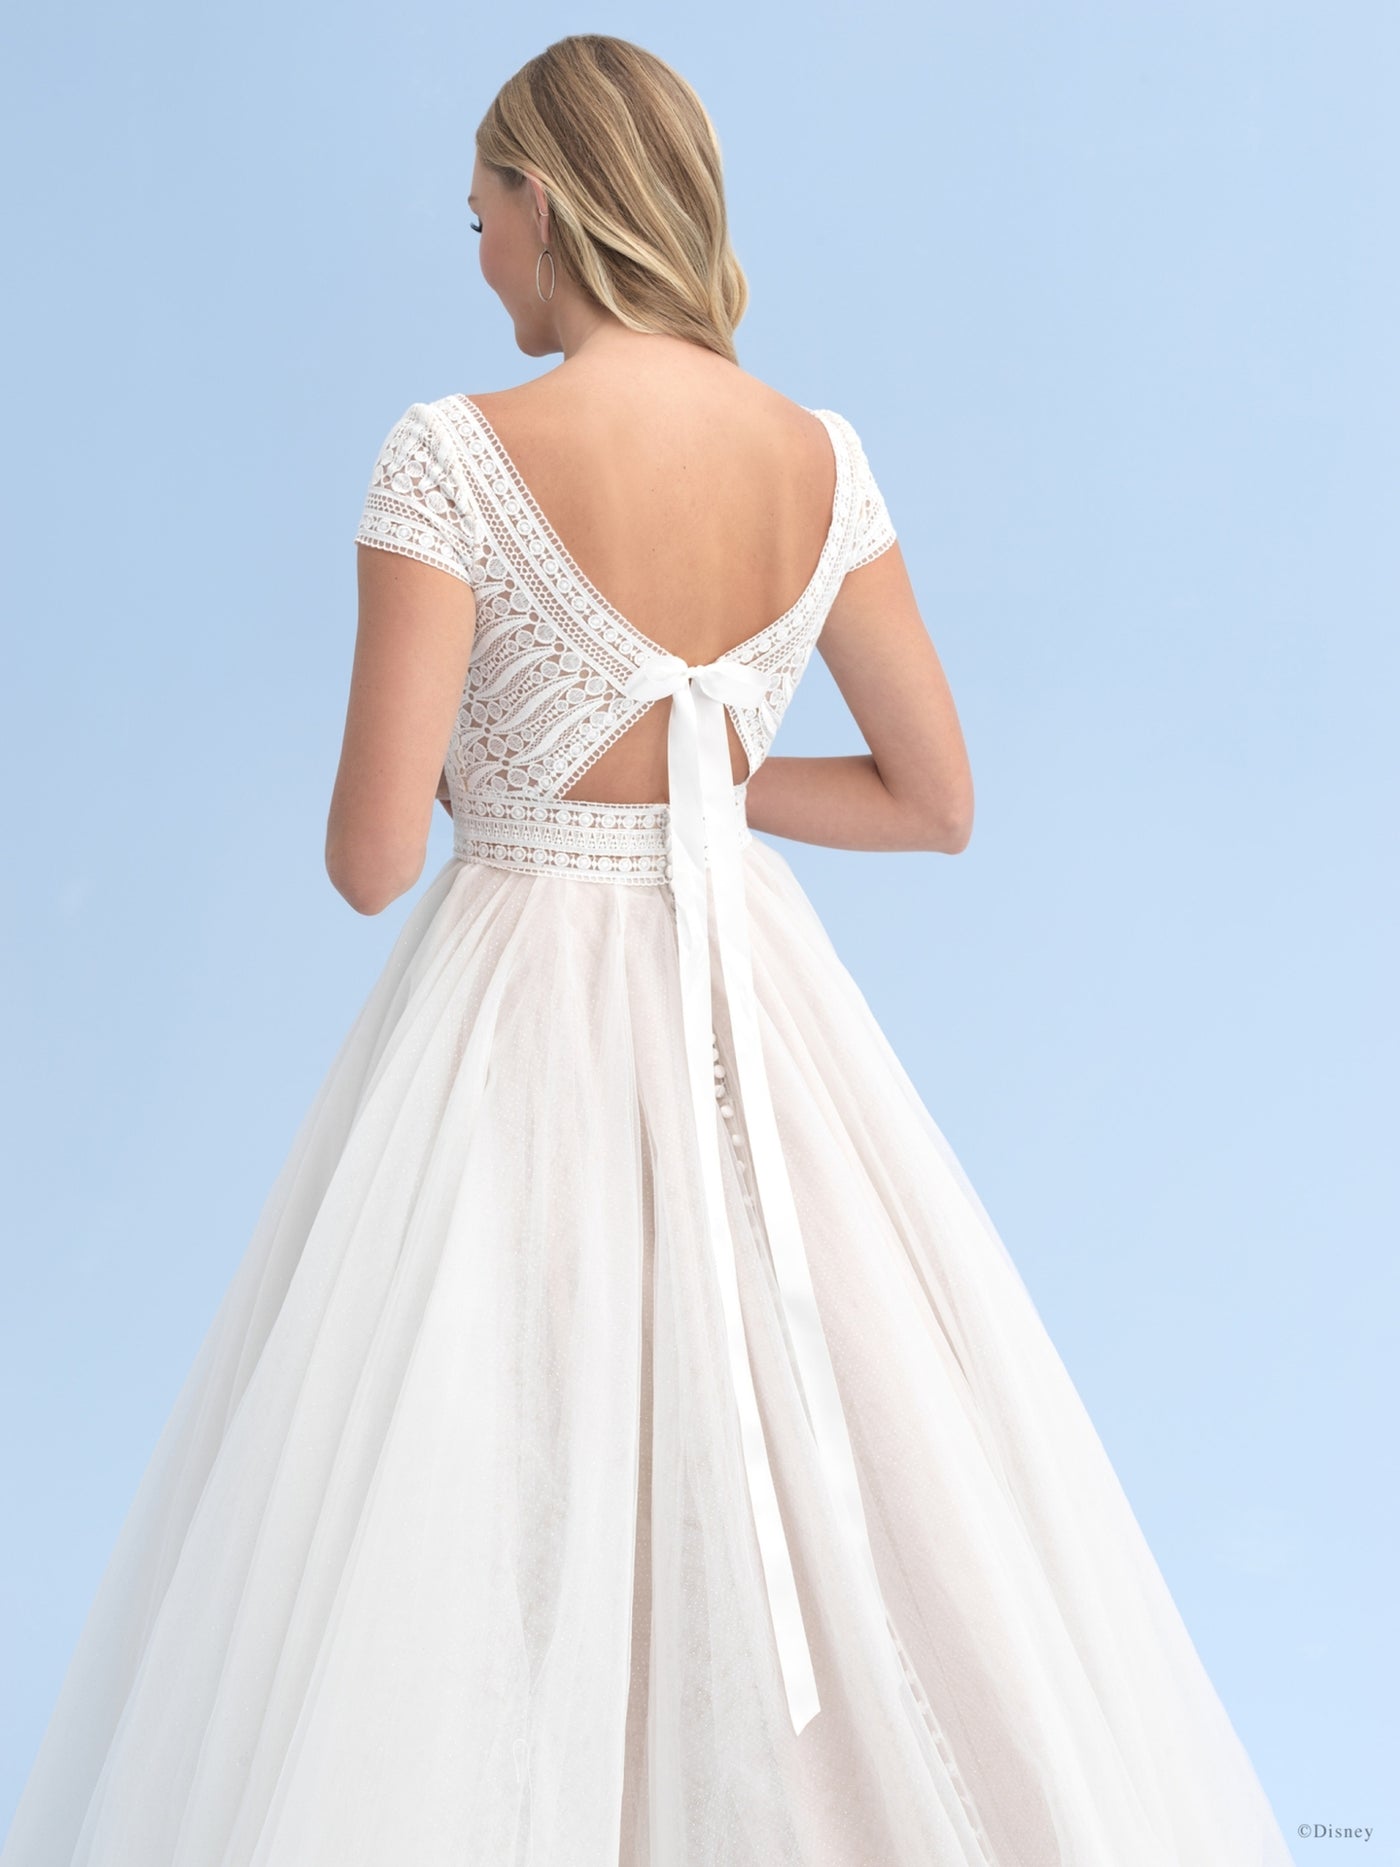 Woman in a Bergamot Bridal Allure Disney Wedding Dress - Rapunzel - Off The Rack with lace bodice and a low-cut back against a blue sky background.